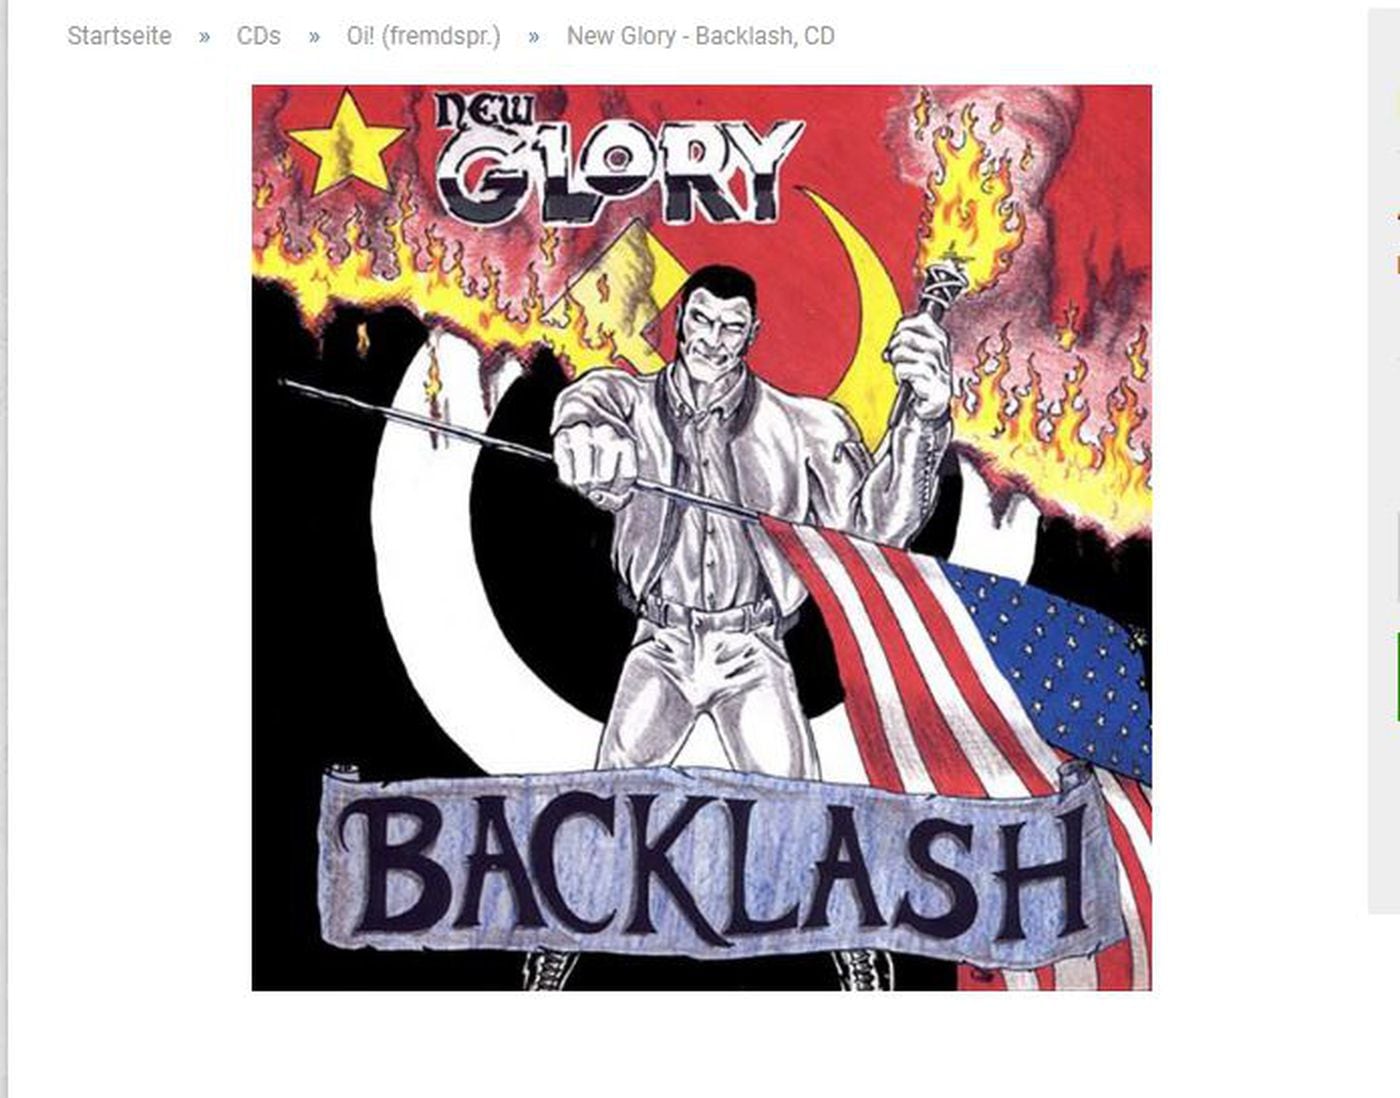 New Glory's lone album, "Backlash," can still be purchased and downloaded online.